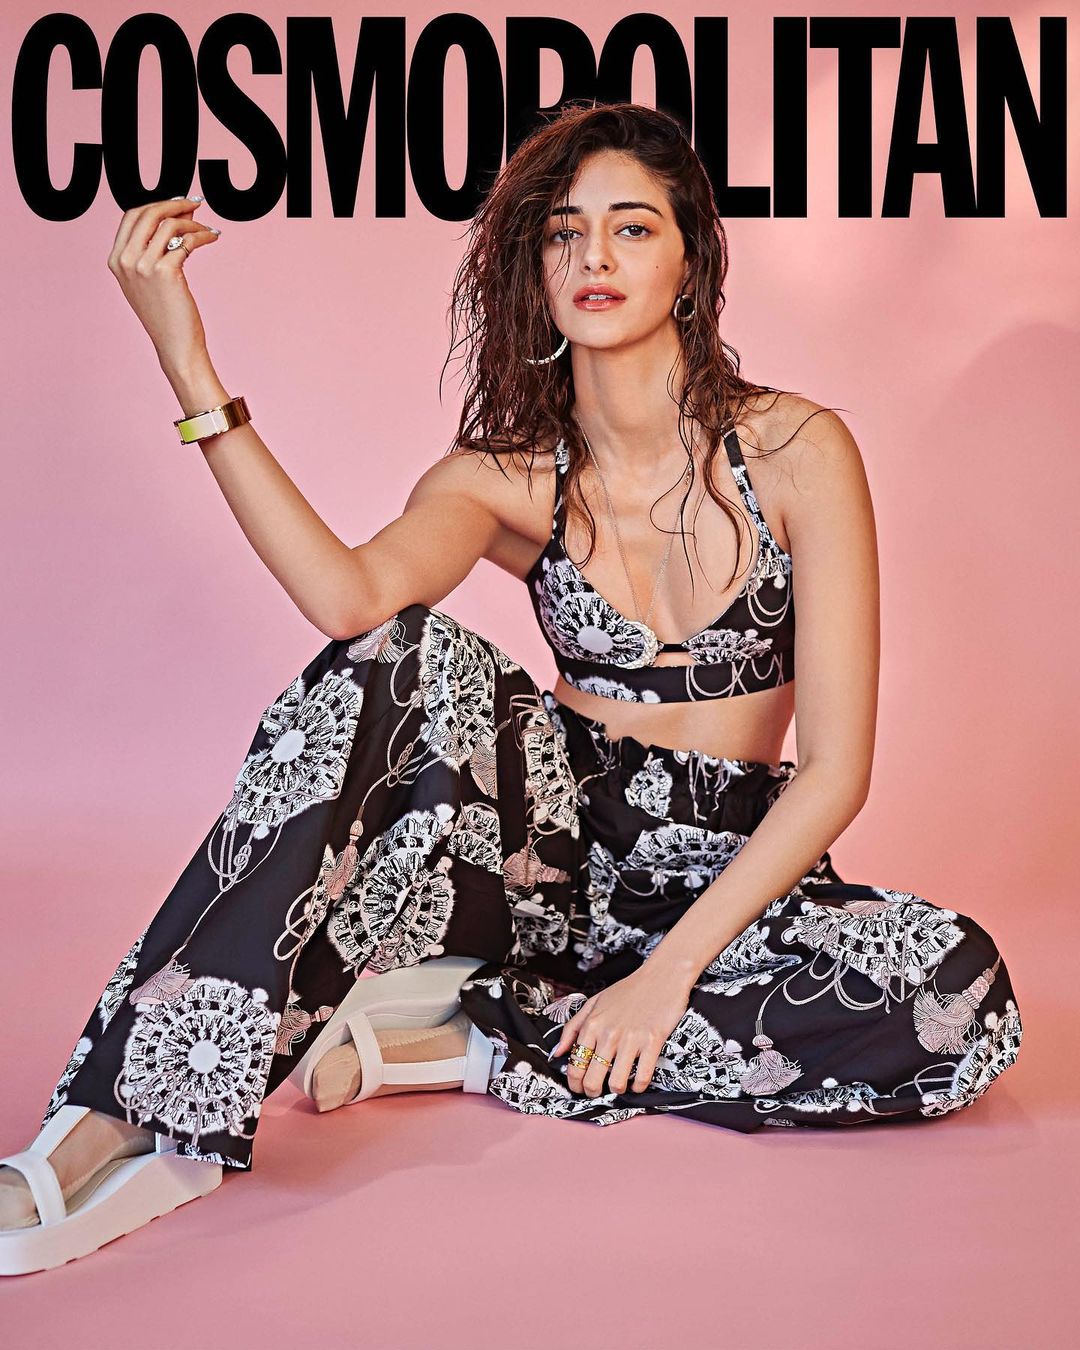 Ananya Panday looks flawless in the printed co-ord set.